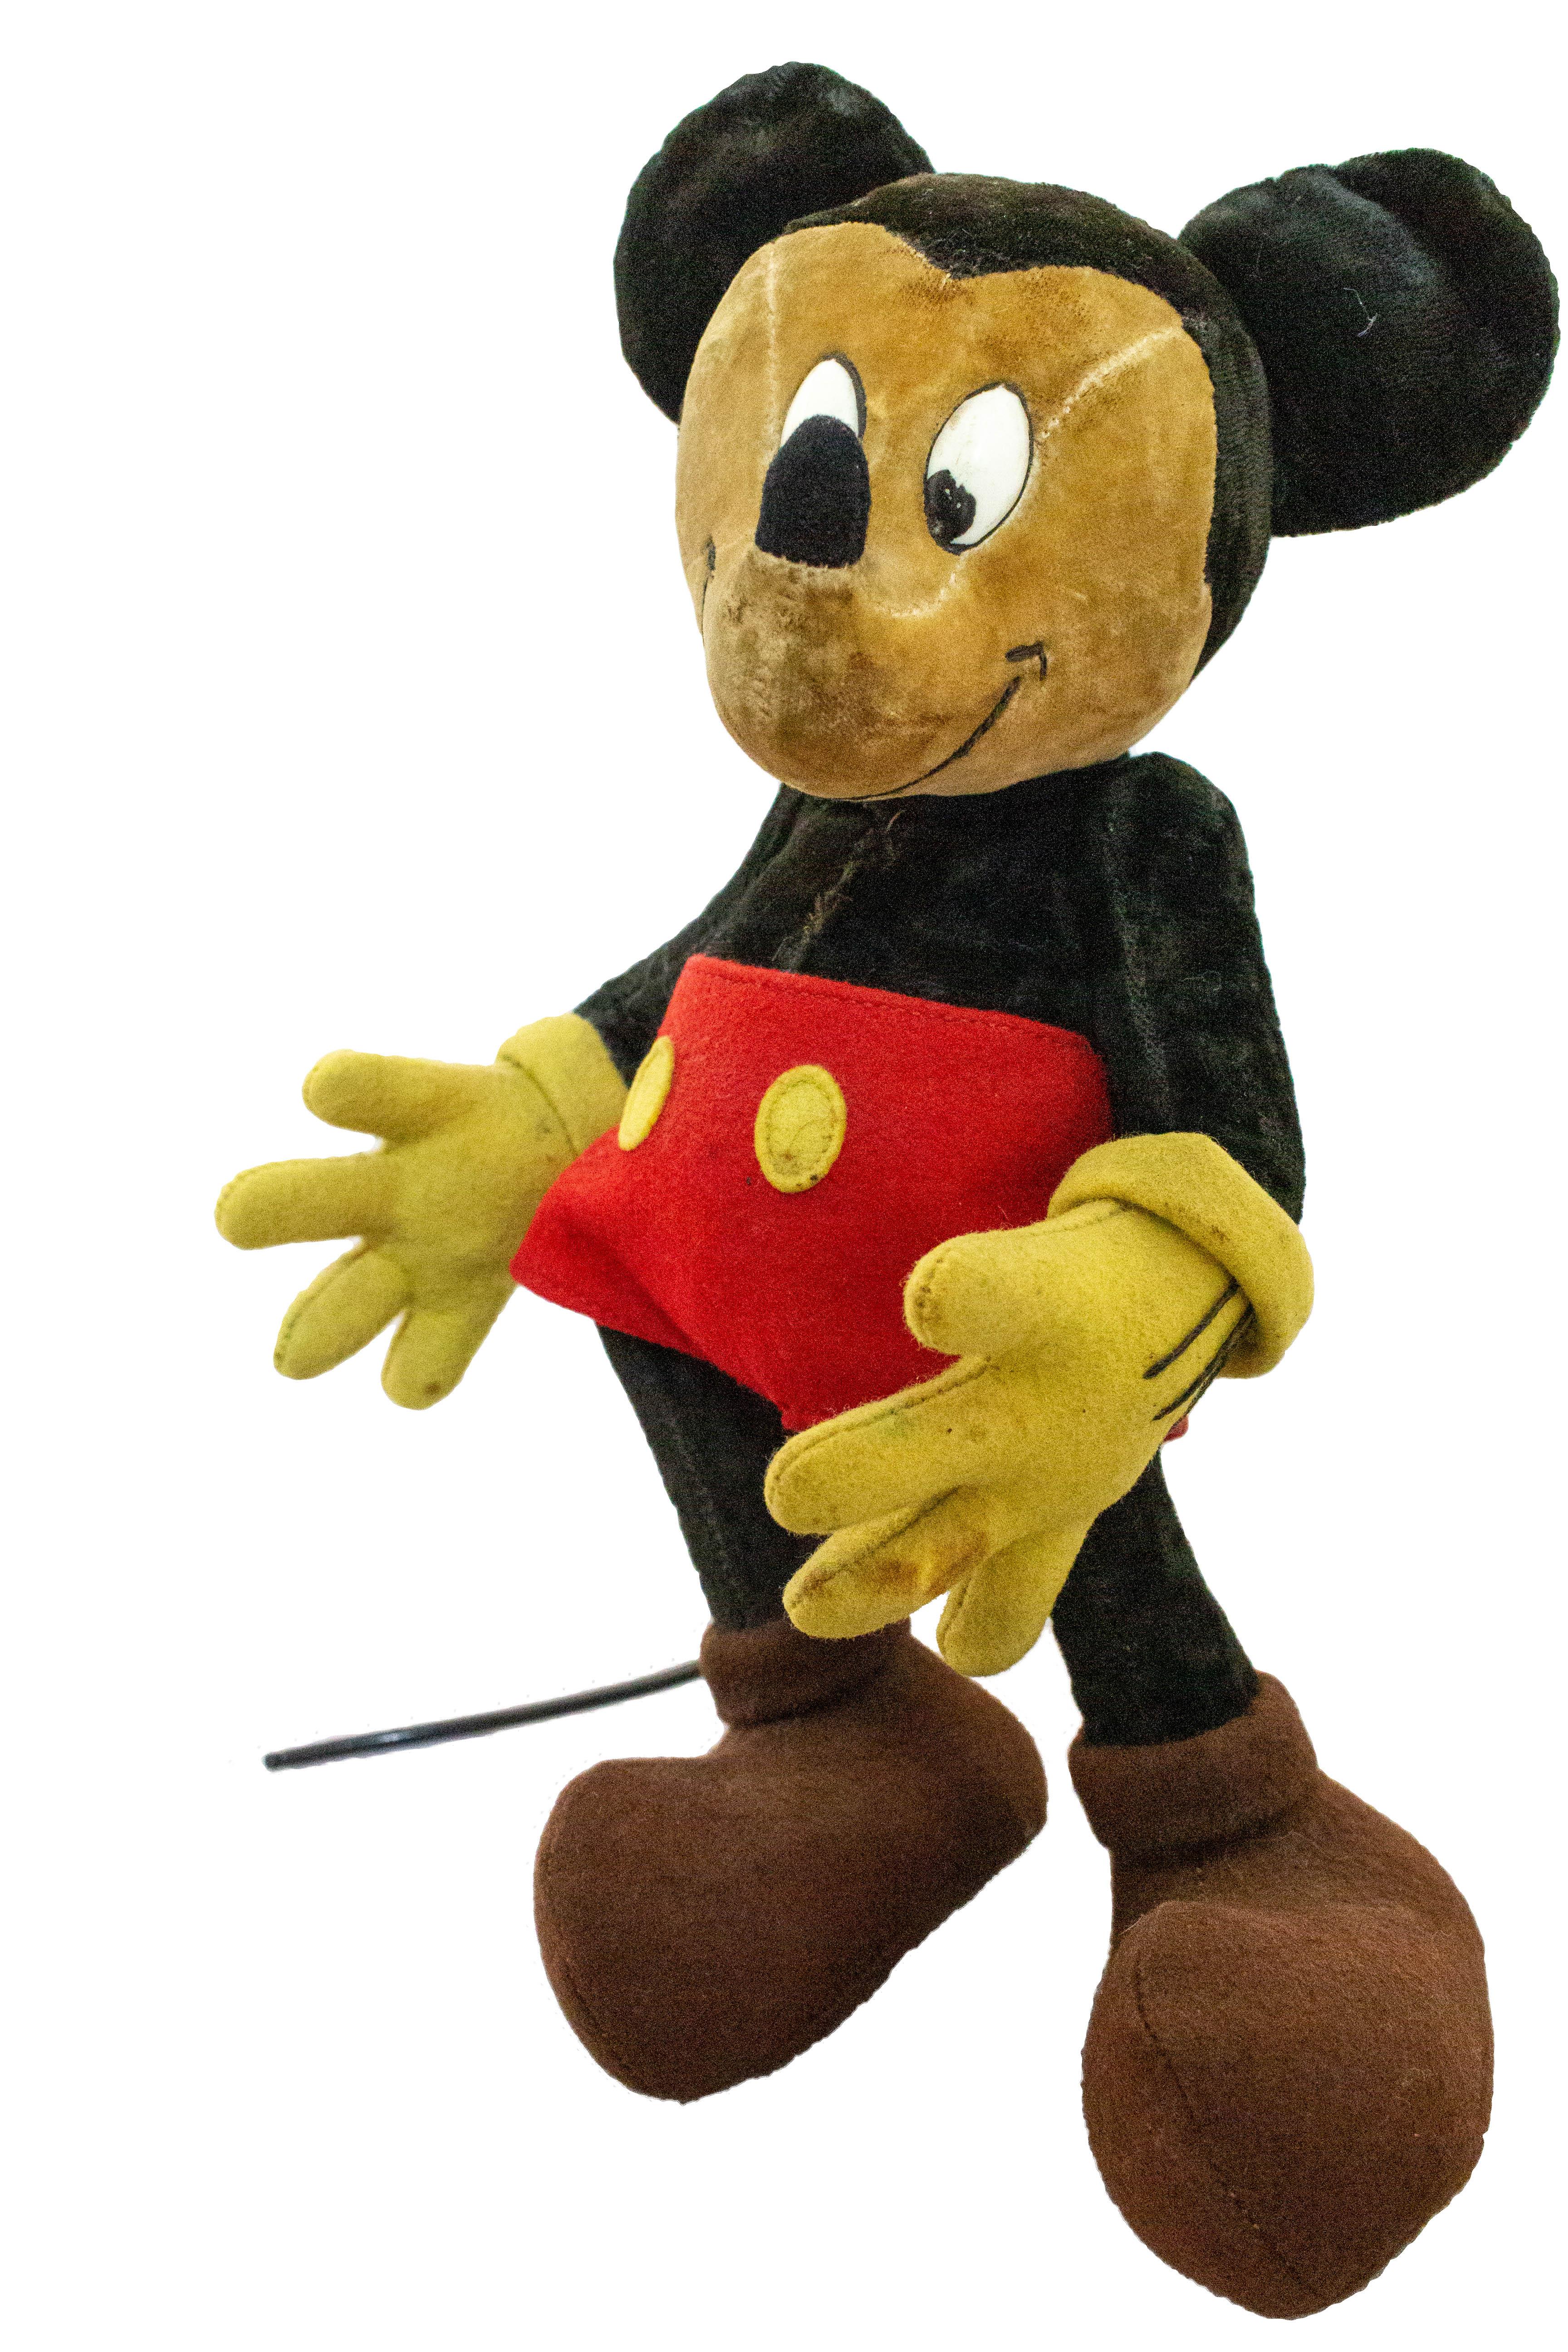 Mickey mouse velvet felt children toy, 1950
Please see also our stuffed felt mickey mouse children toy, circa 1930
Vintage condition, so does has traces of age and use, so do view all pictures well.